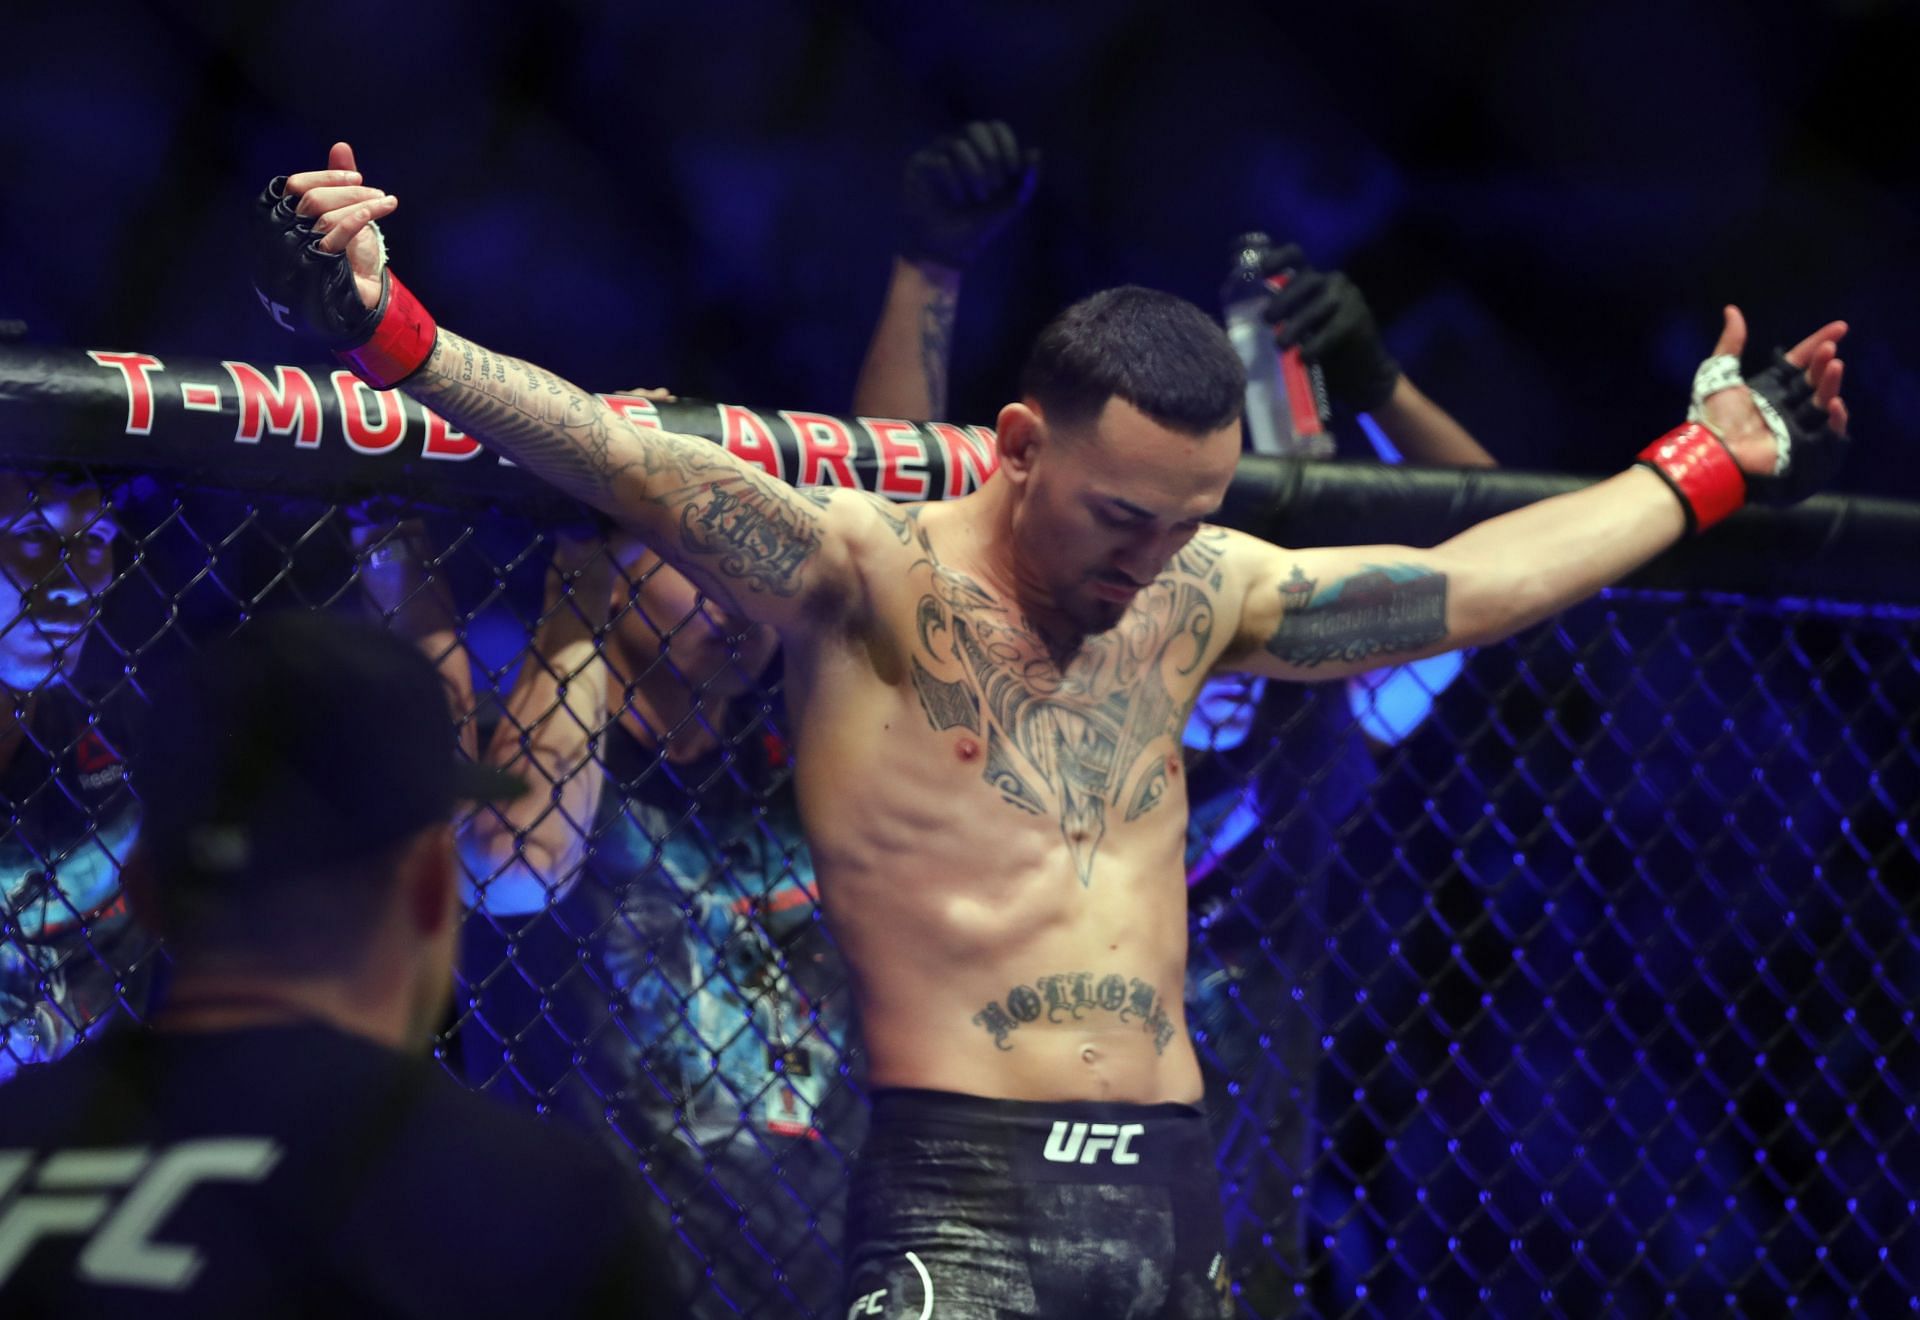 Max Holloway is now on a two-fight winning streak